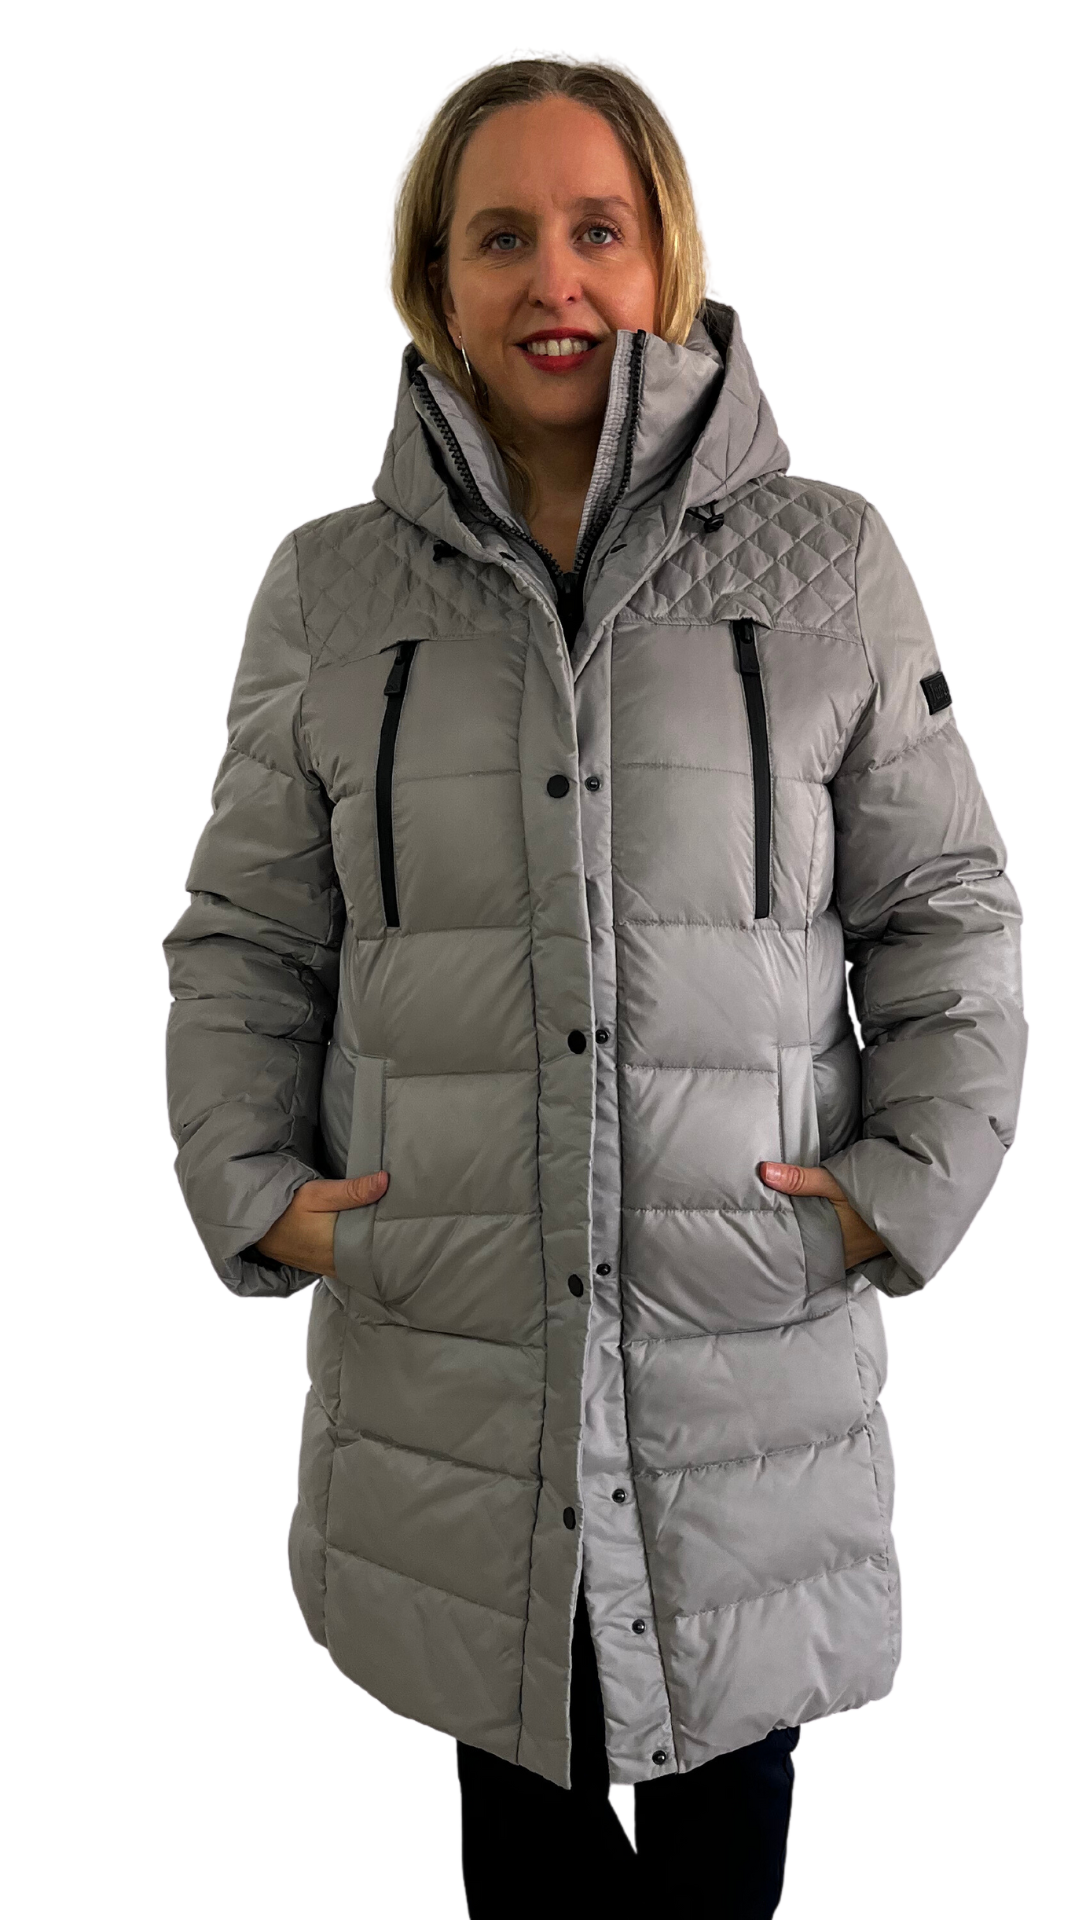 Quilted Yoke Puffer with Four Snap Pockets. Style JUN2356